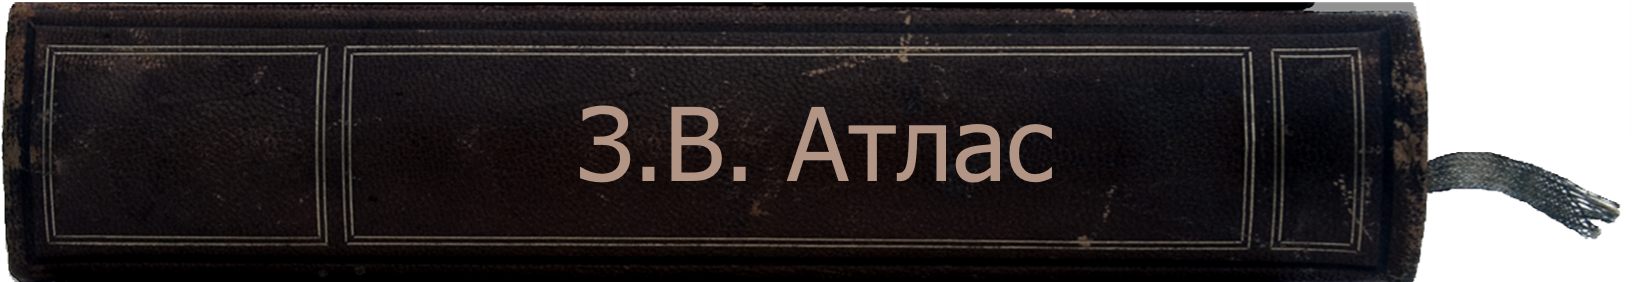 зватлас.png